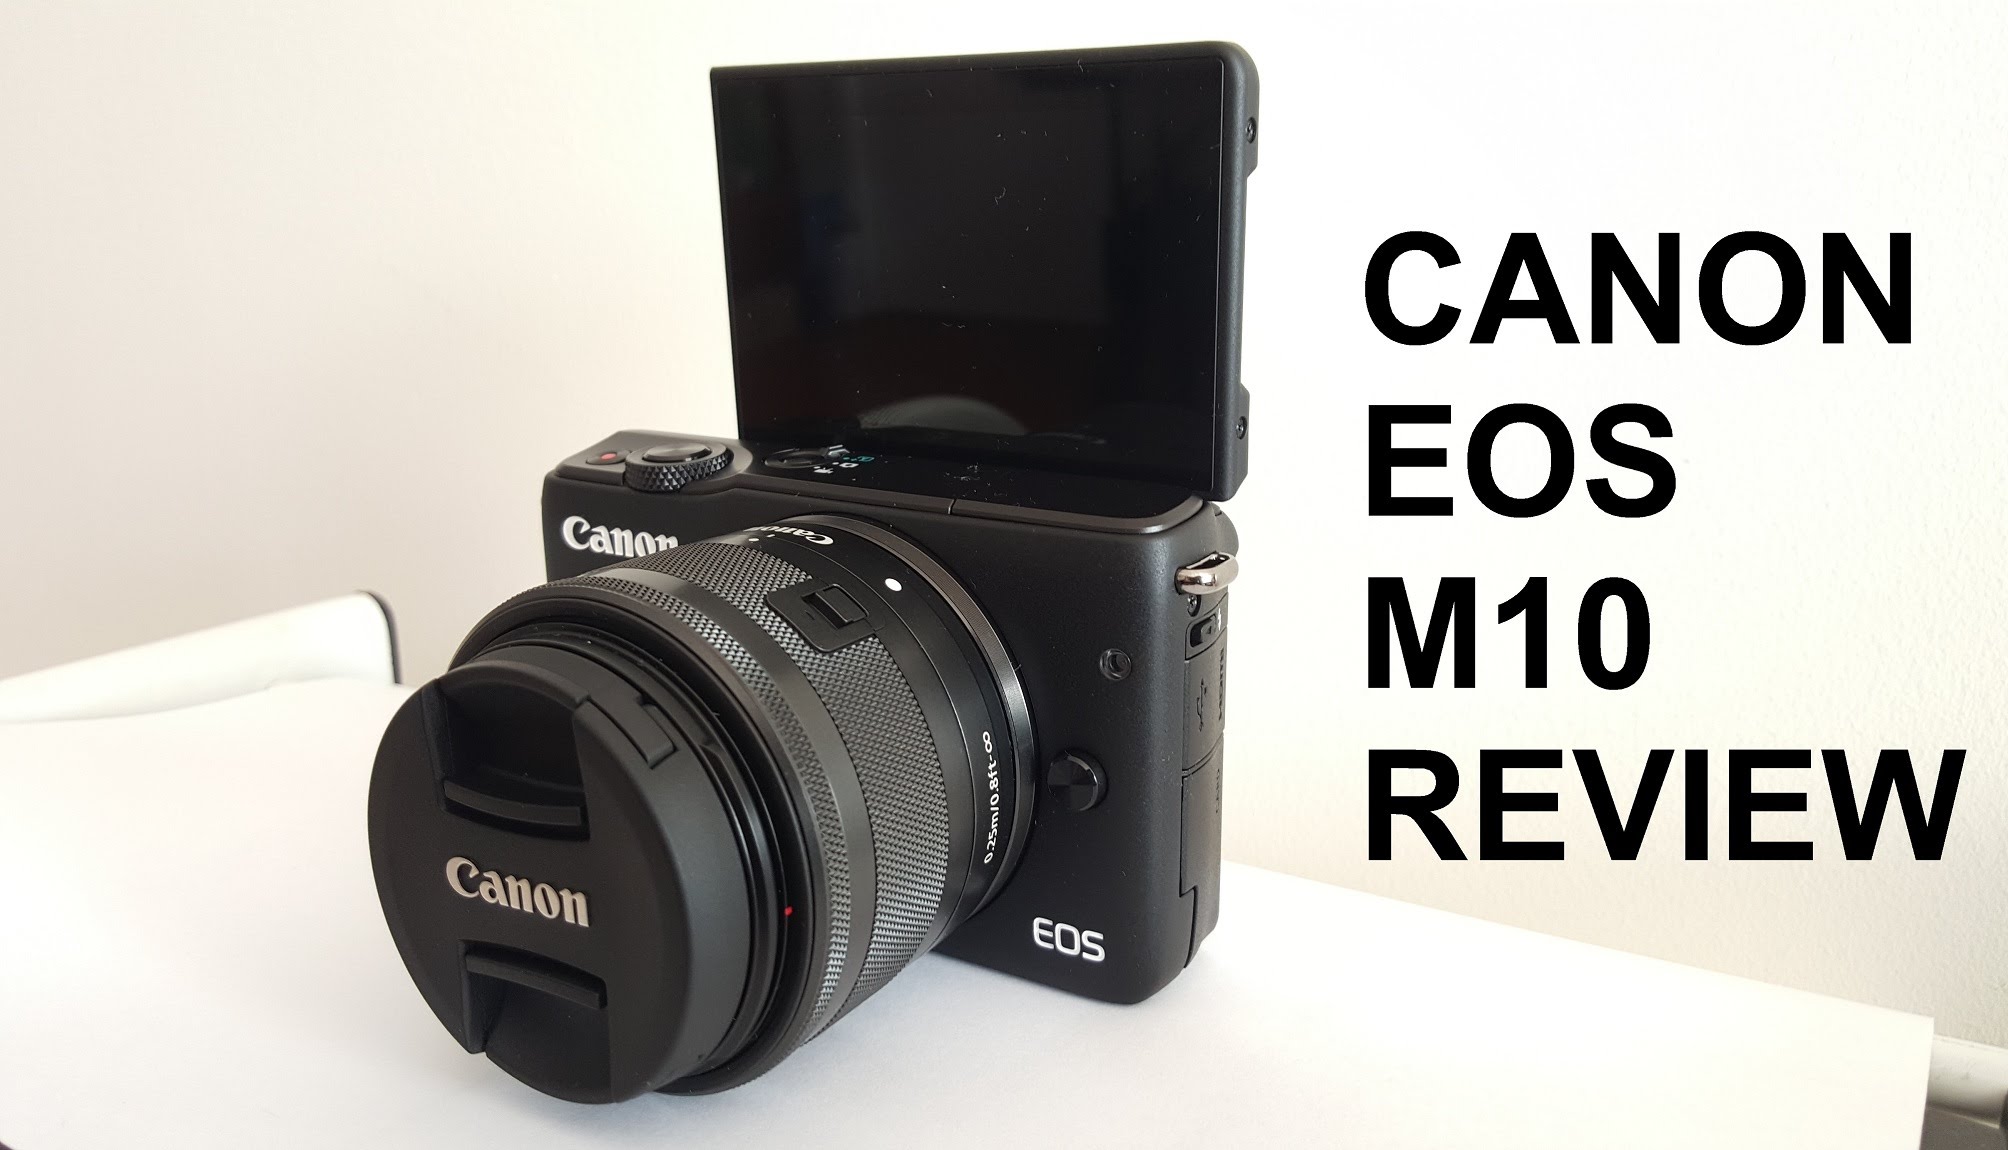 Canon EOS M10 review. Best budget camera for youtube?